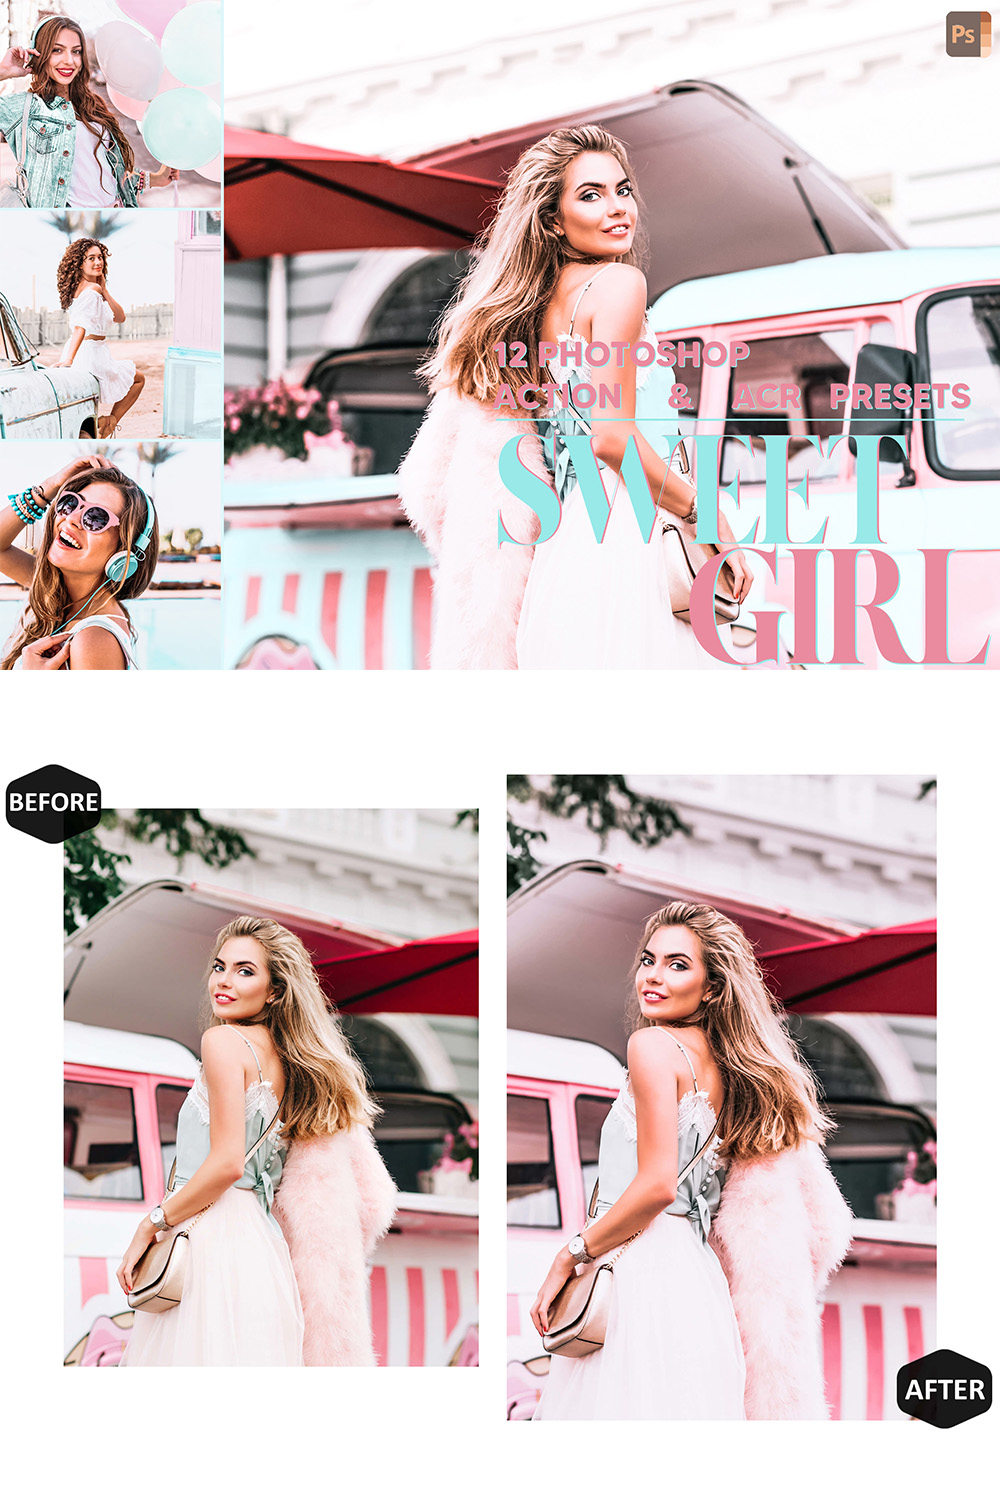 12 Photoshop Actions, Sweet Girl Ps Action, Light ACR Preset, Colorful Ps Filter, Atn Pictures And style Theme For Instagram, Blogger pinterest preview image.